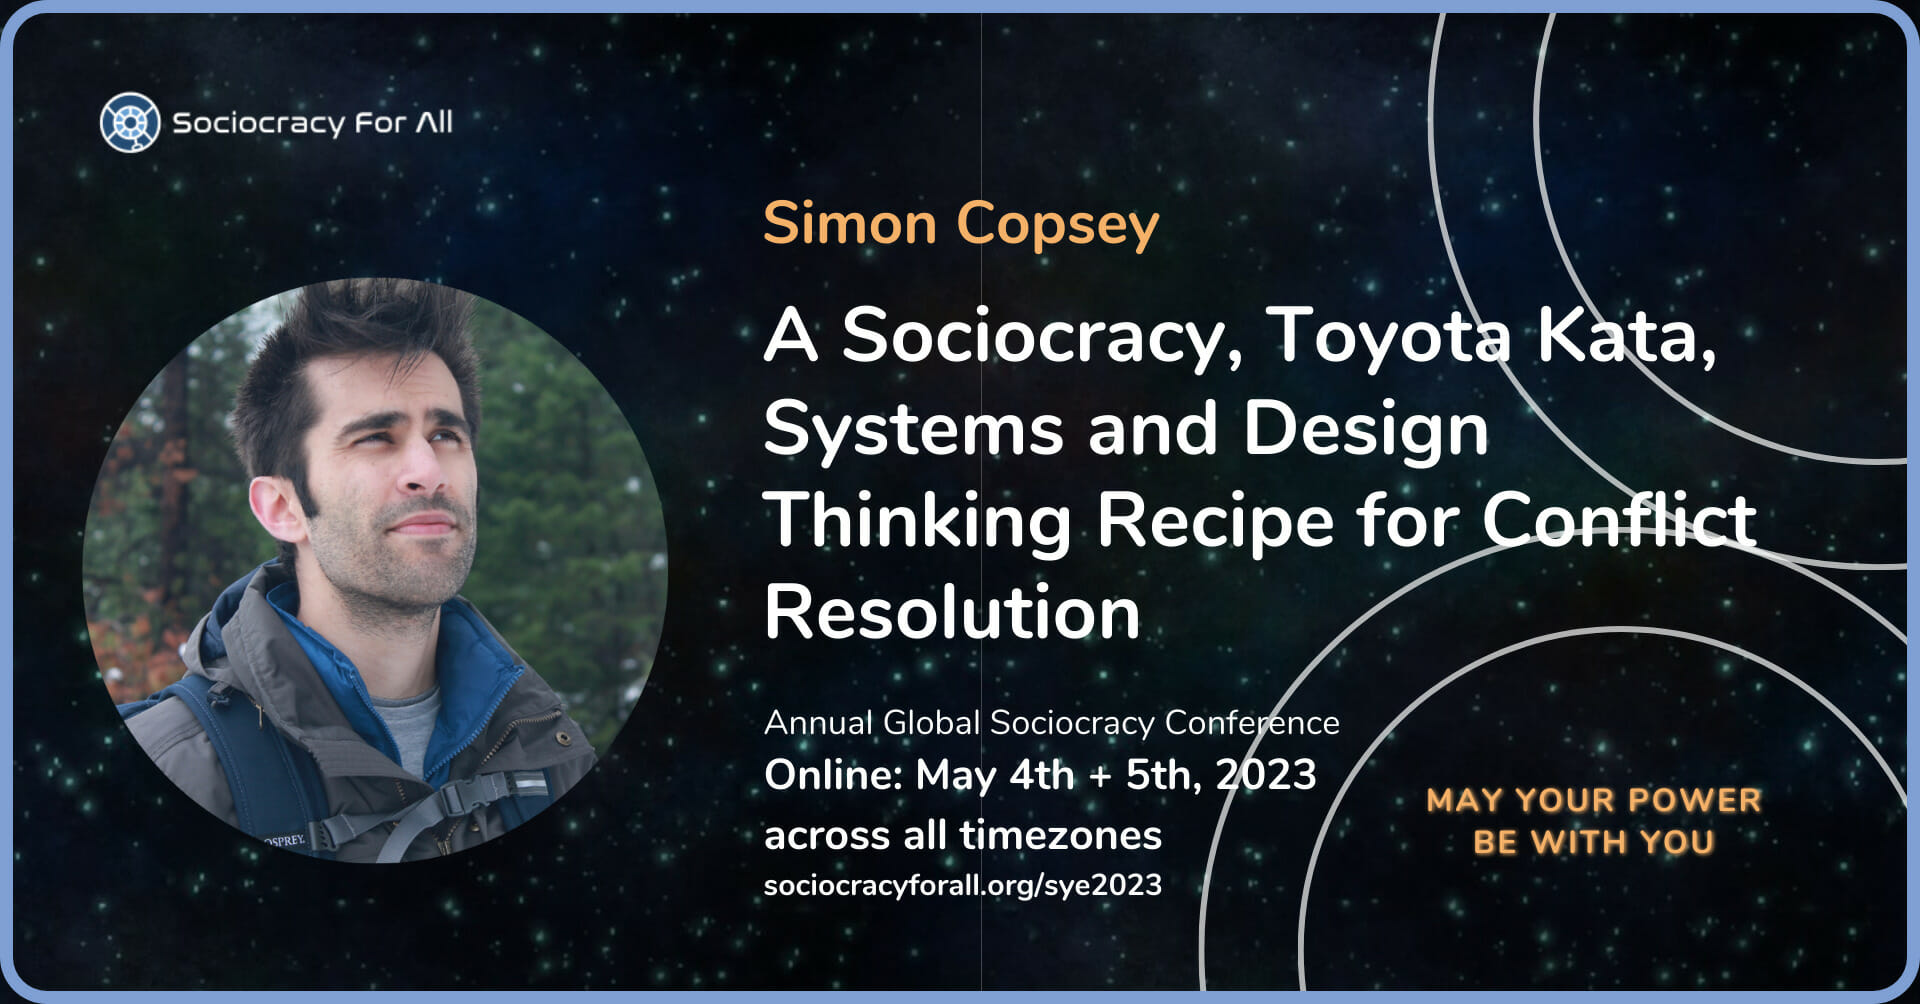 A Sociocracy, Toyota Kata, Systems and Design Thinking Recipe for Conflict Resolution